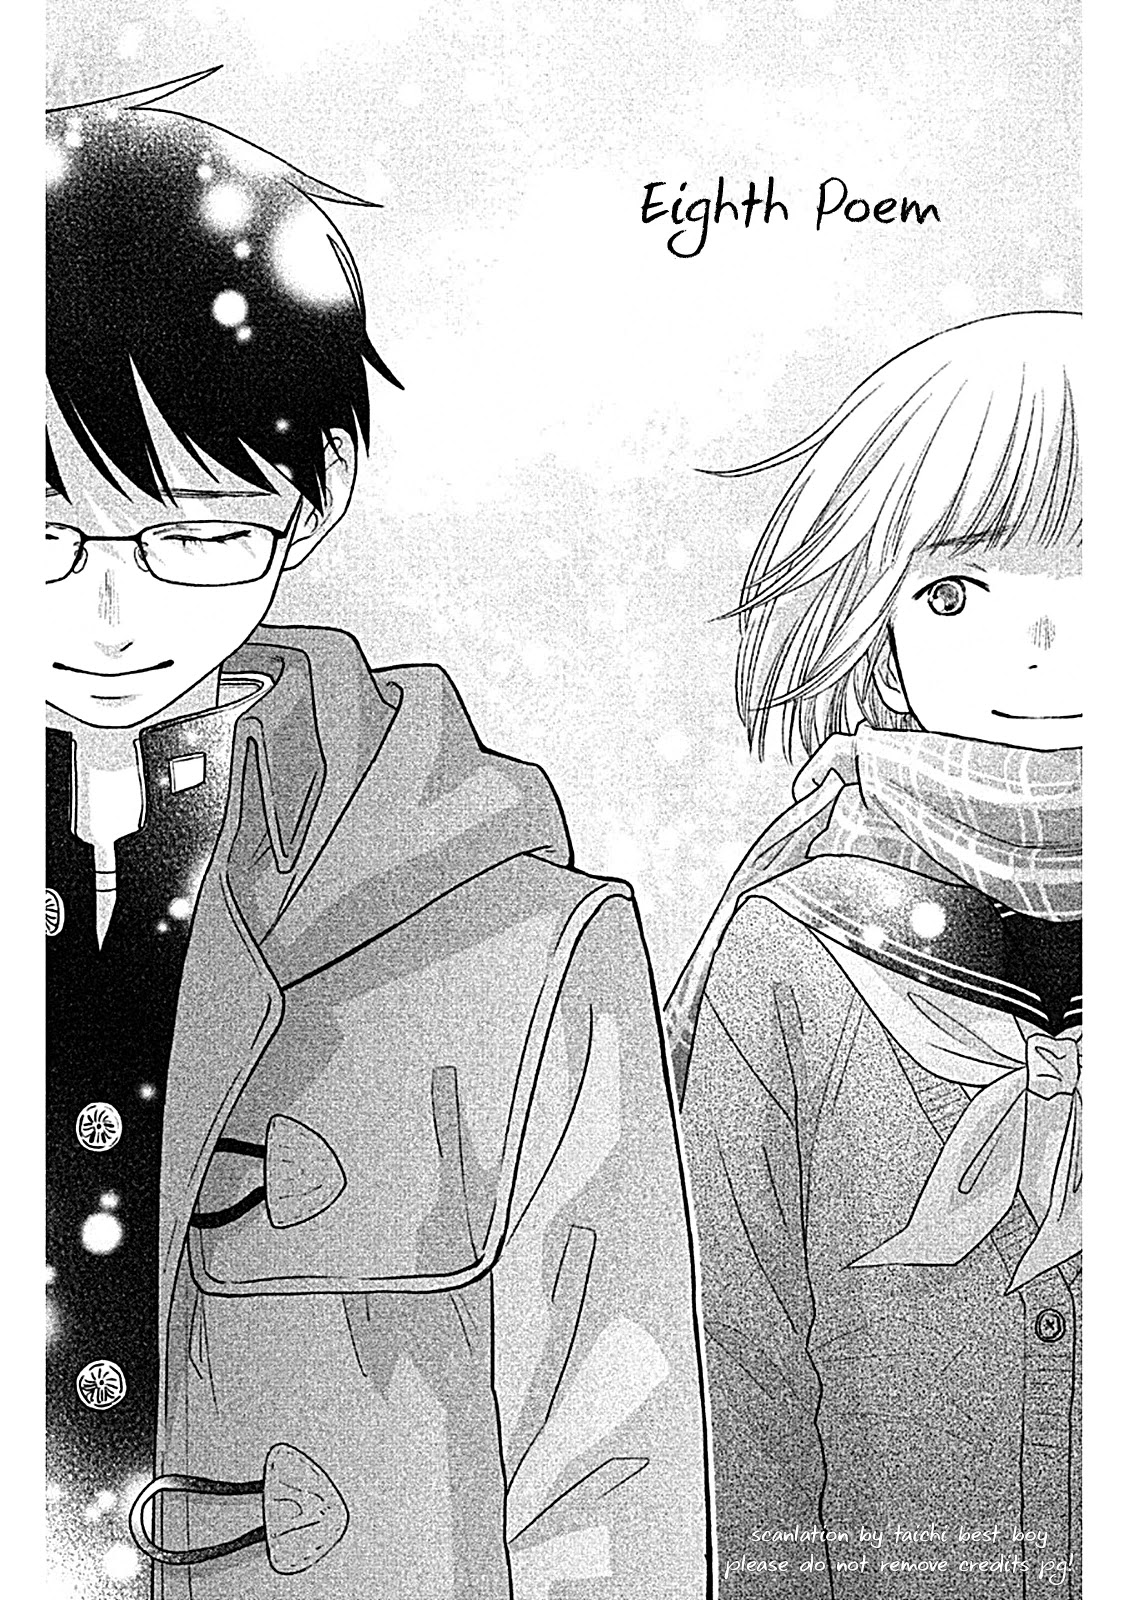 Chihayafuru: Middle School Arc Chapter 8: 8Th Poem - Picture 3